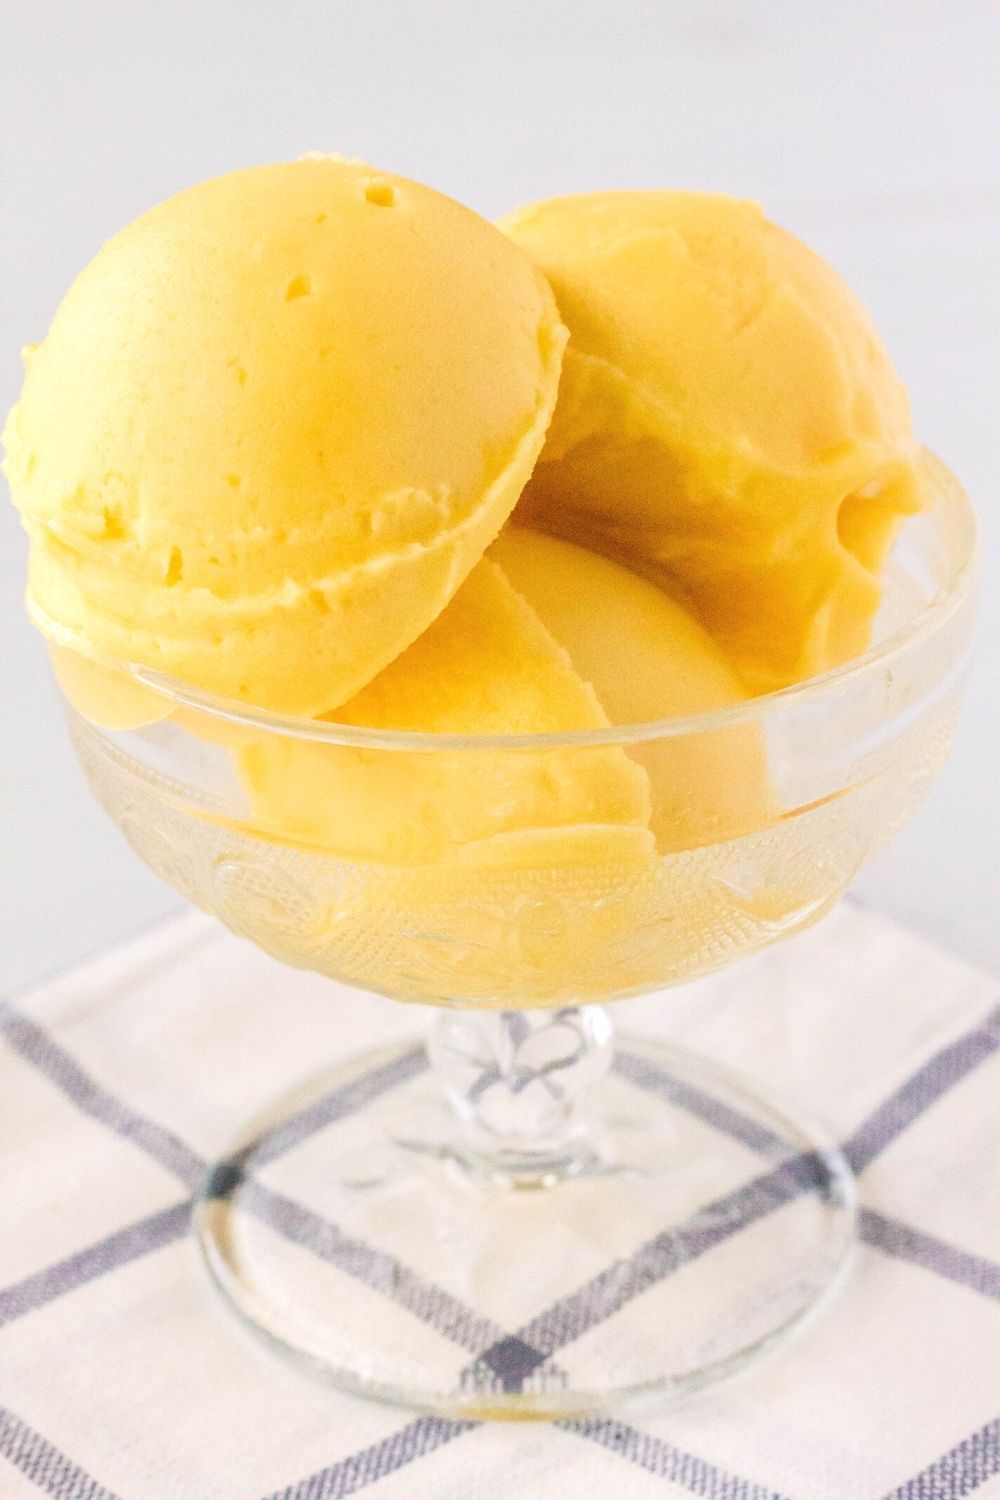 side view of a glass dessert cup filled with three scoops of peach sorbet made in the Ninja Creami machine.